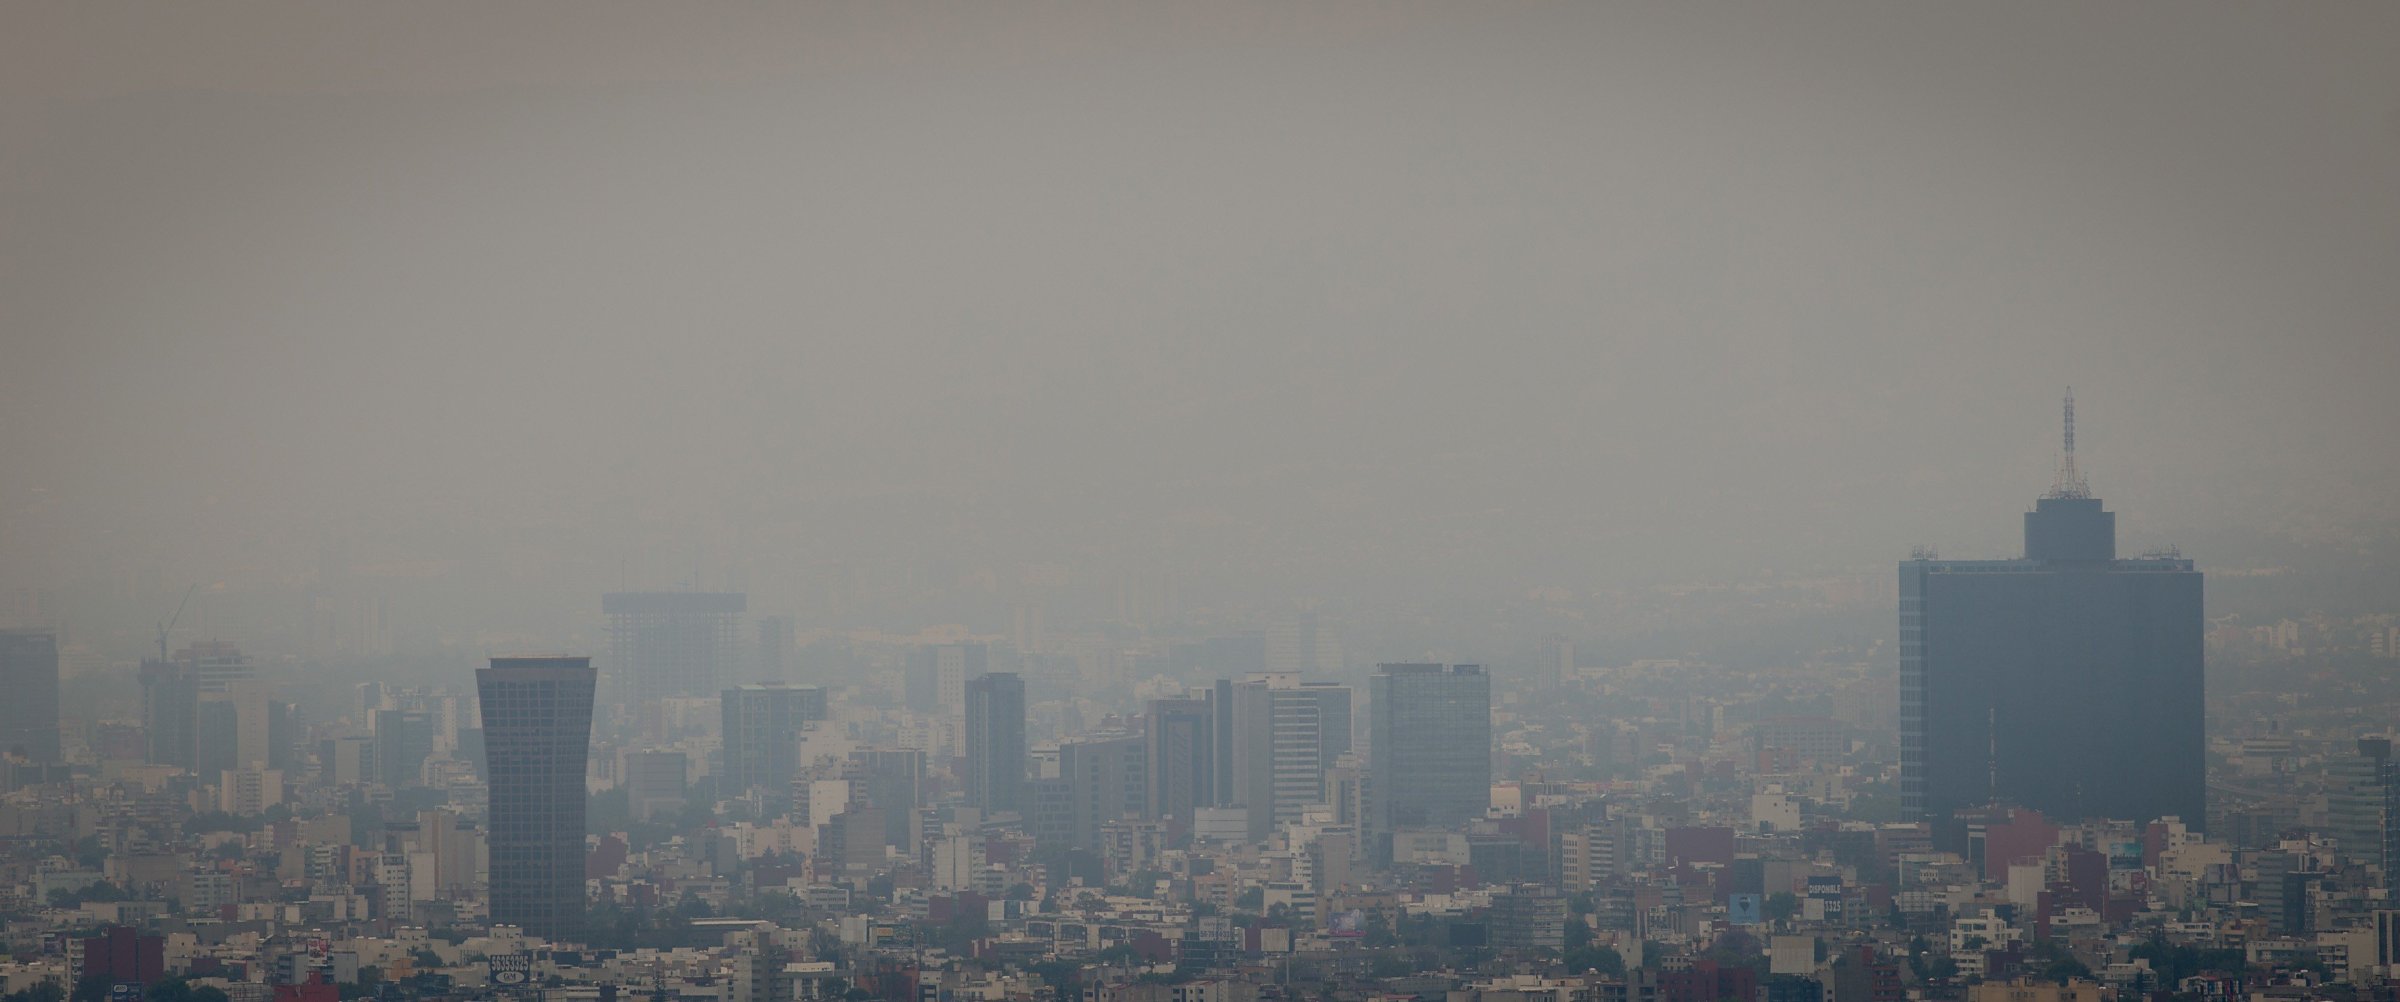 This photo shows a view of the dense smog layer covering the buildings from the look-out of the Torre Latinoamericana, in Mexico city on March 17, 2016.